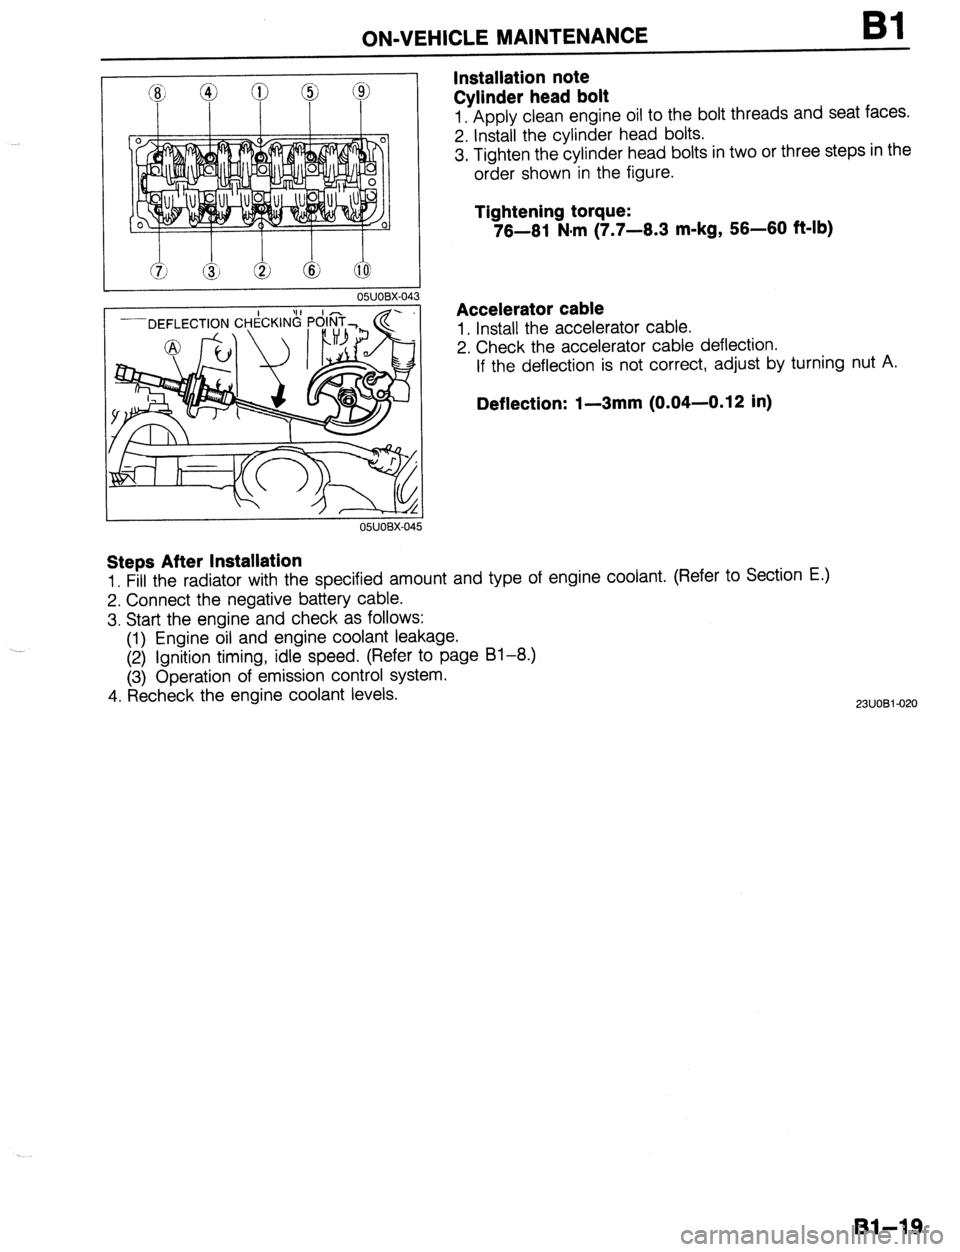 MAZDA PROTEGE 1992 Service Manual . 
ON-VEHICLE MAINTENANCE 
Installation note 
Cylinder head bolt Bl 
1. Apply clean engine oil to the bolt threads and seat faces. 
2. Install the cylinder head bolts. 
3. Tighten the cylinder head bo